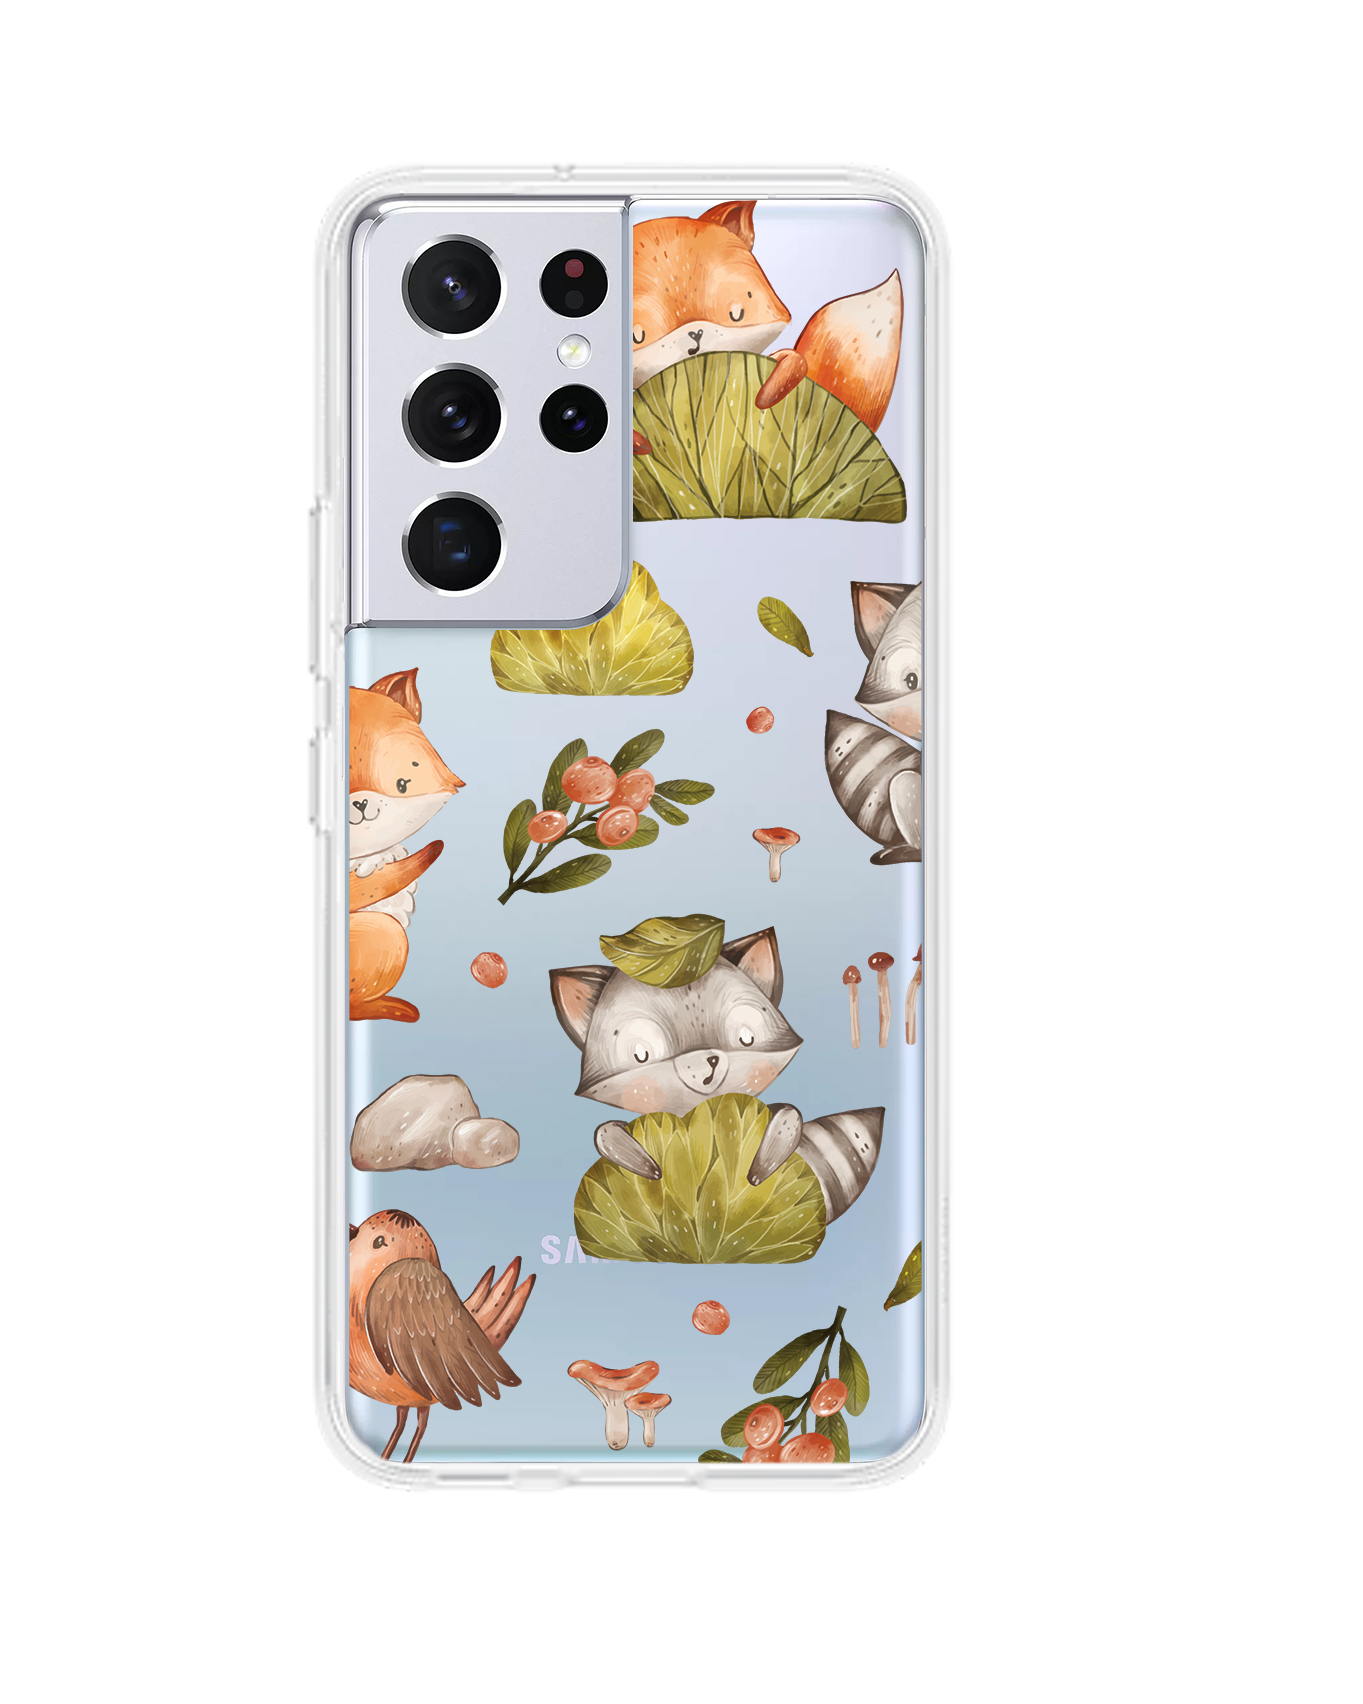 Android Rearguard Hybrid Case - Racoon & Friends